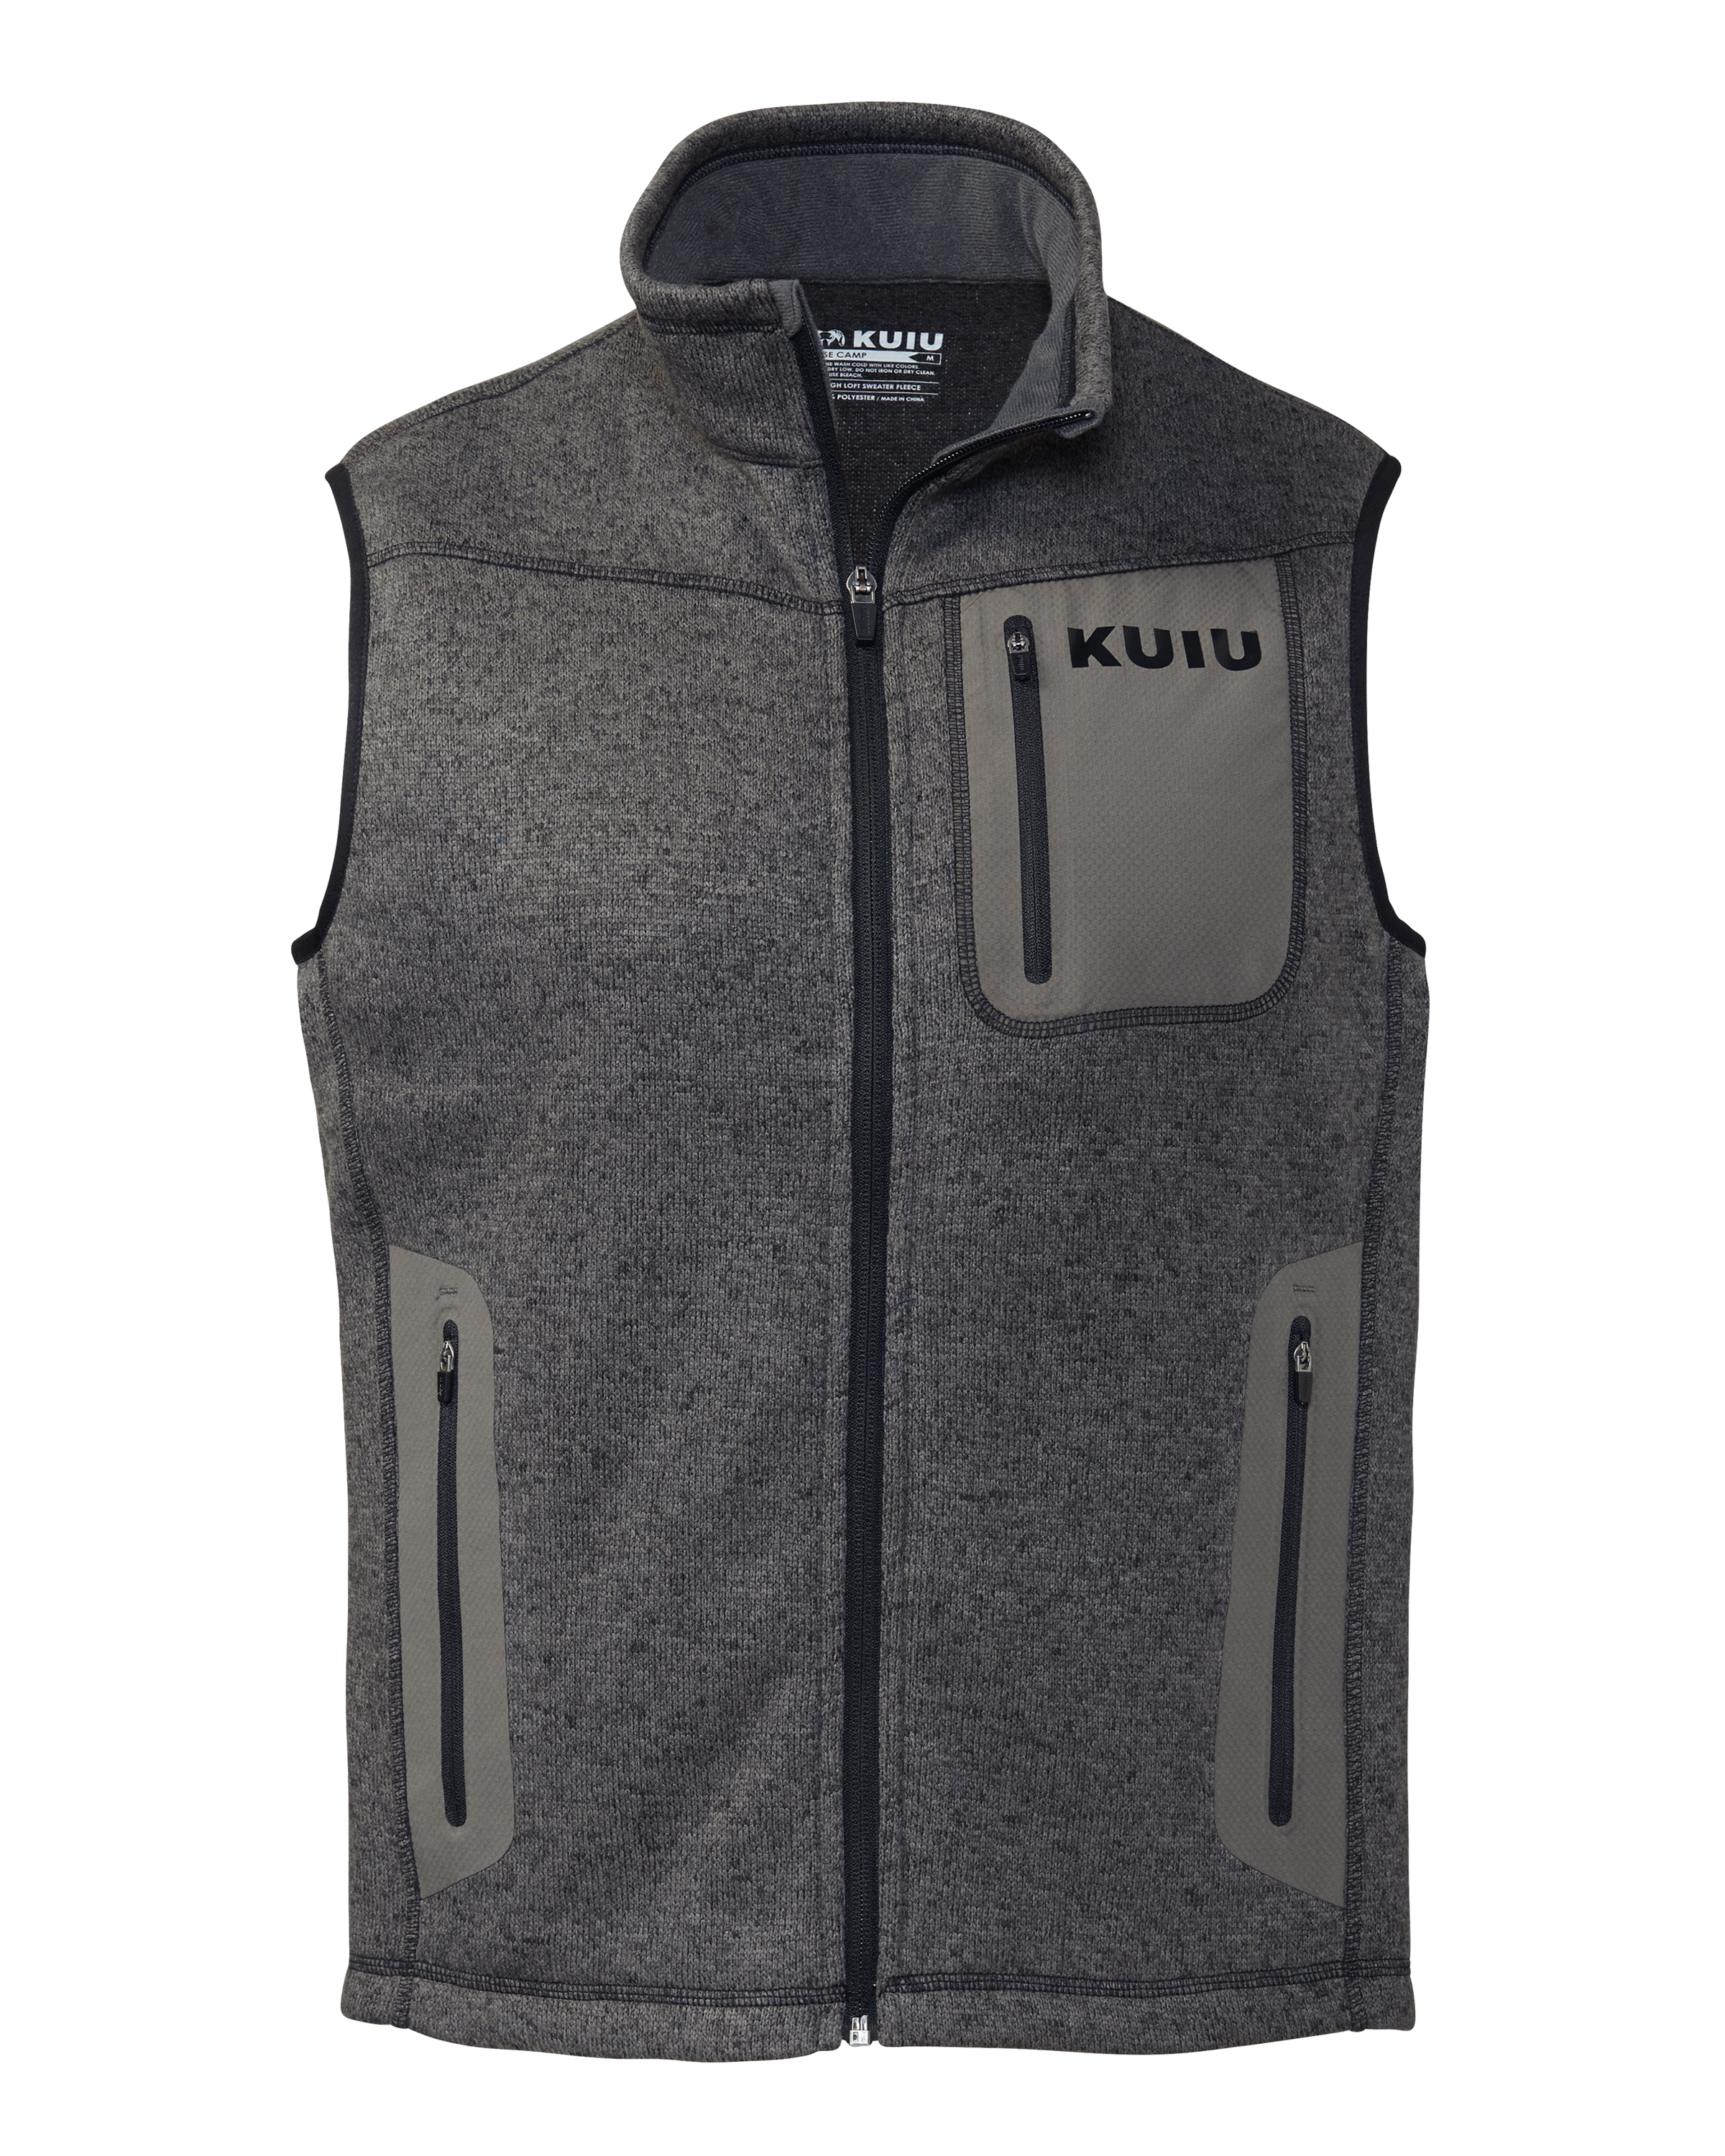 KUIU Base Camp Sweater Vest in Charcoal | Large